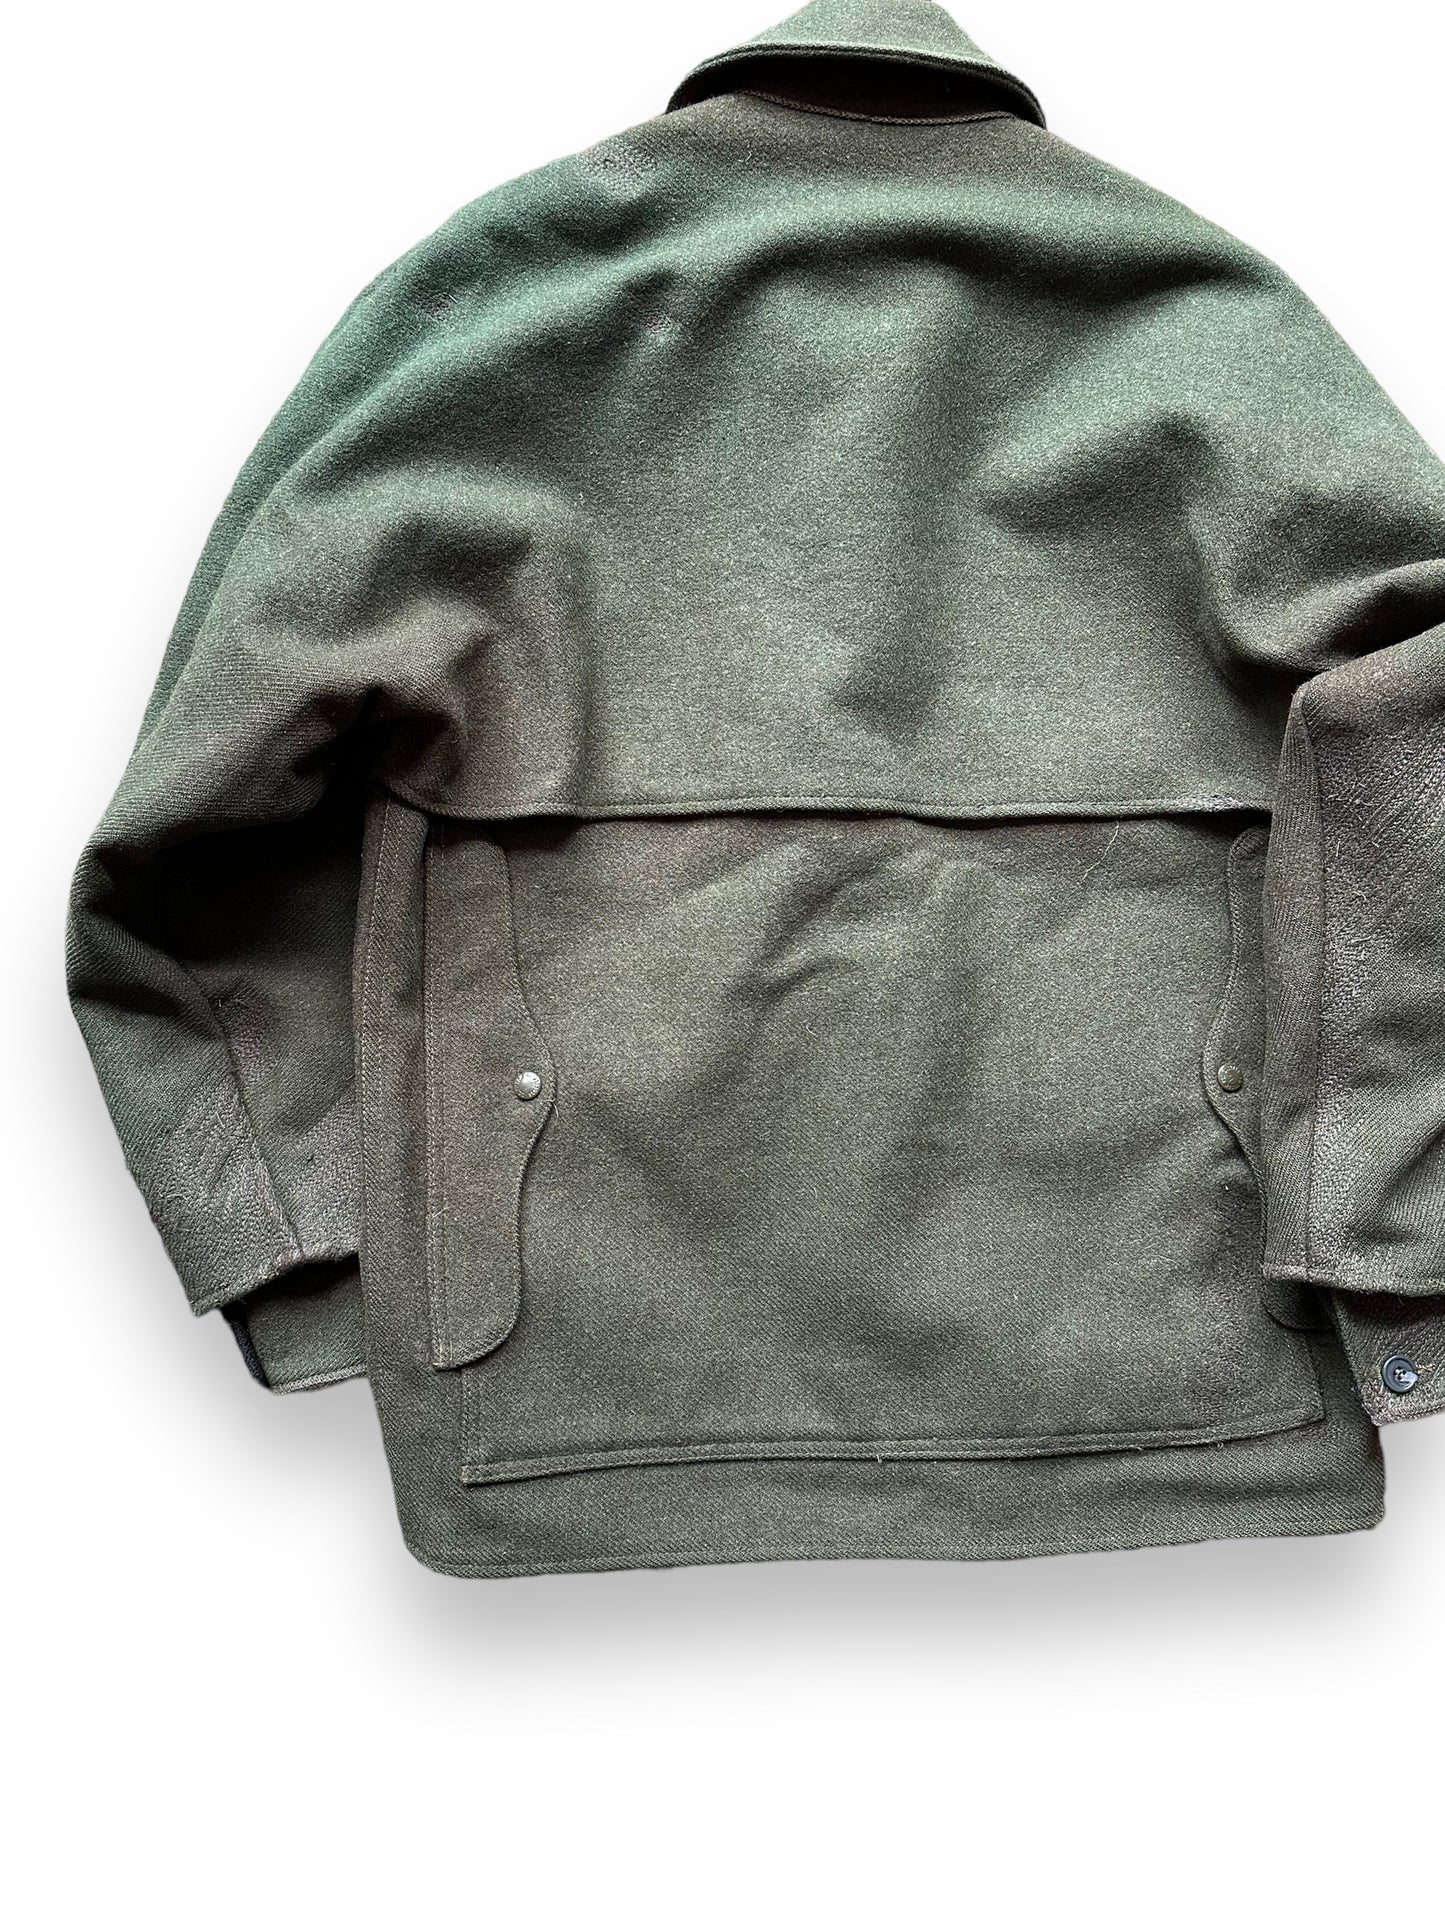 Rear Left View of Vintage Filson Forest Green Repaired Double Mackinaw Cruiser SZ 40 |  Vintage Filson Cruiser Seattle | Vintage Workwear Seattle